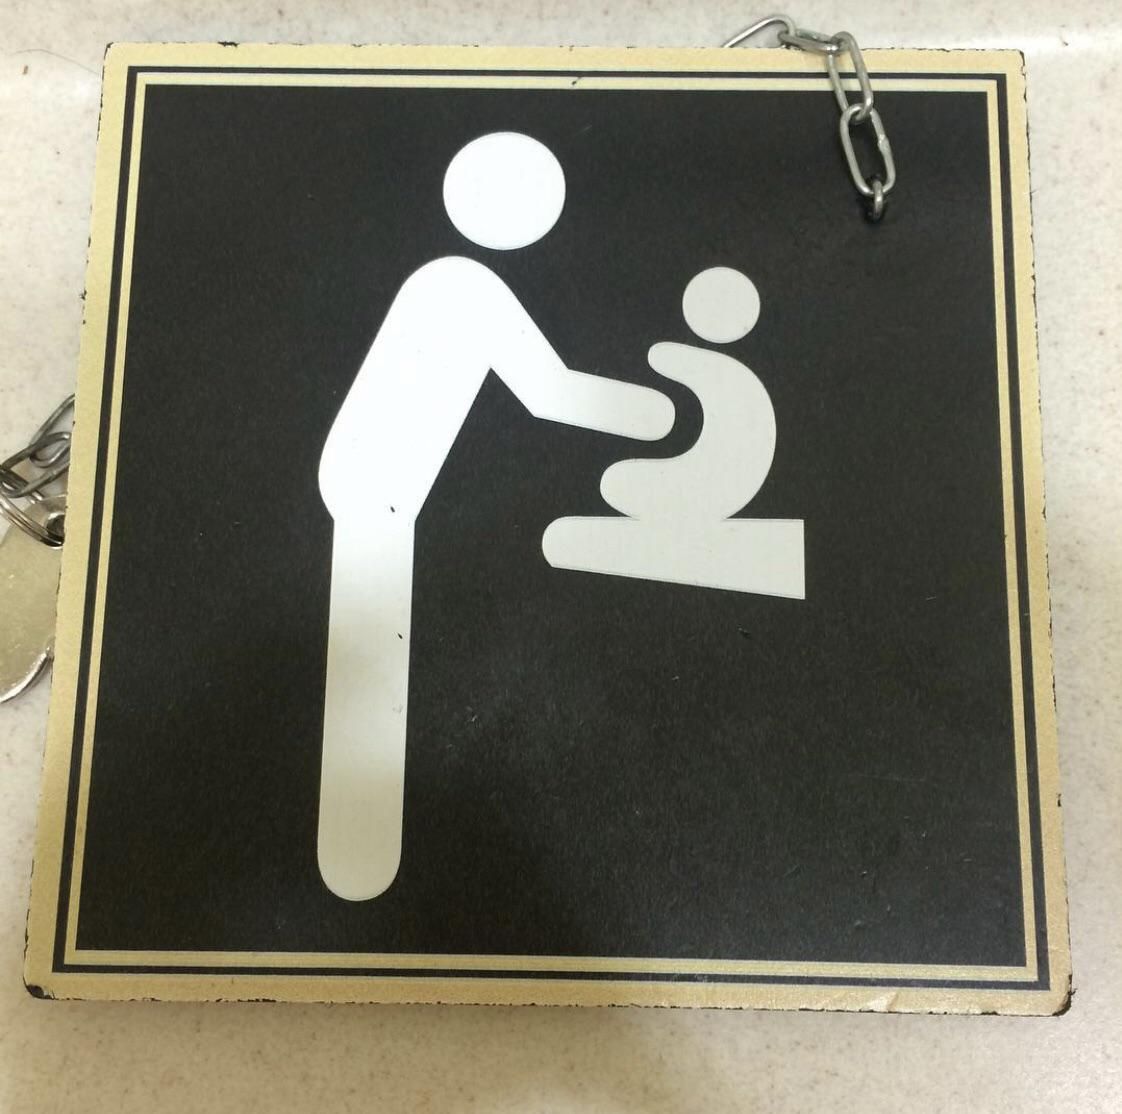 I firmly disagree with these ‘punch your baby in the stomach toilets’